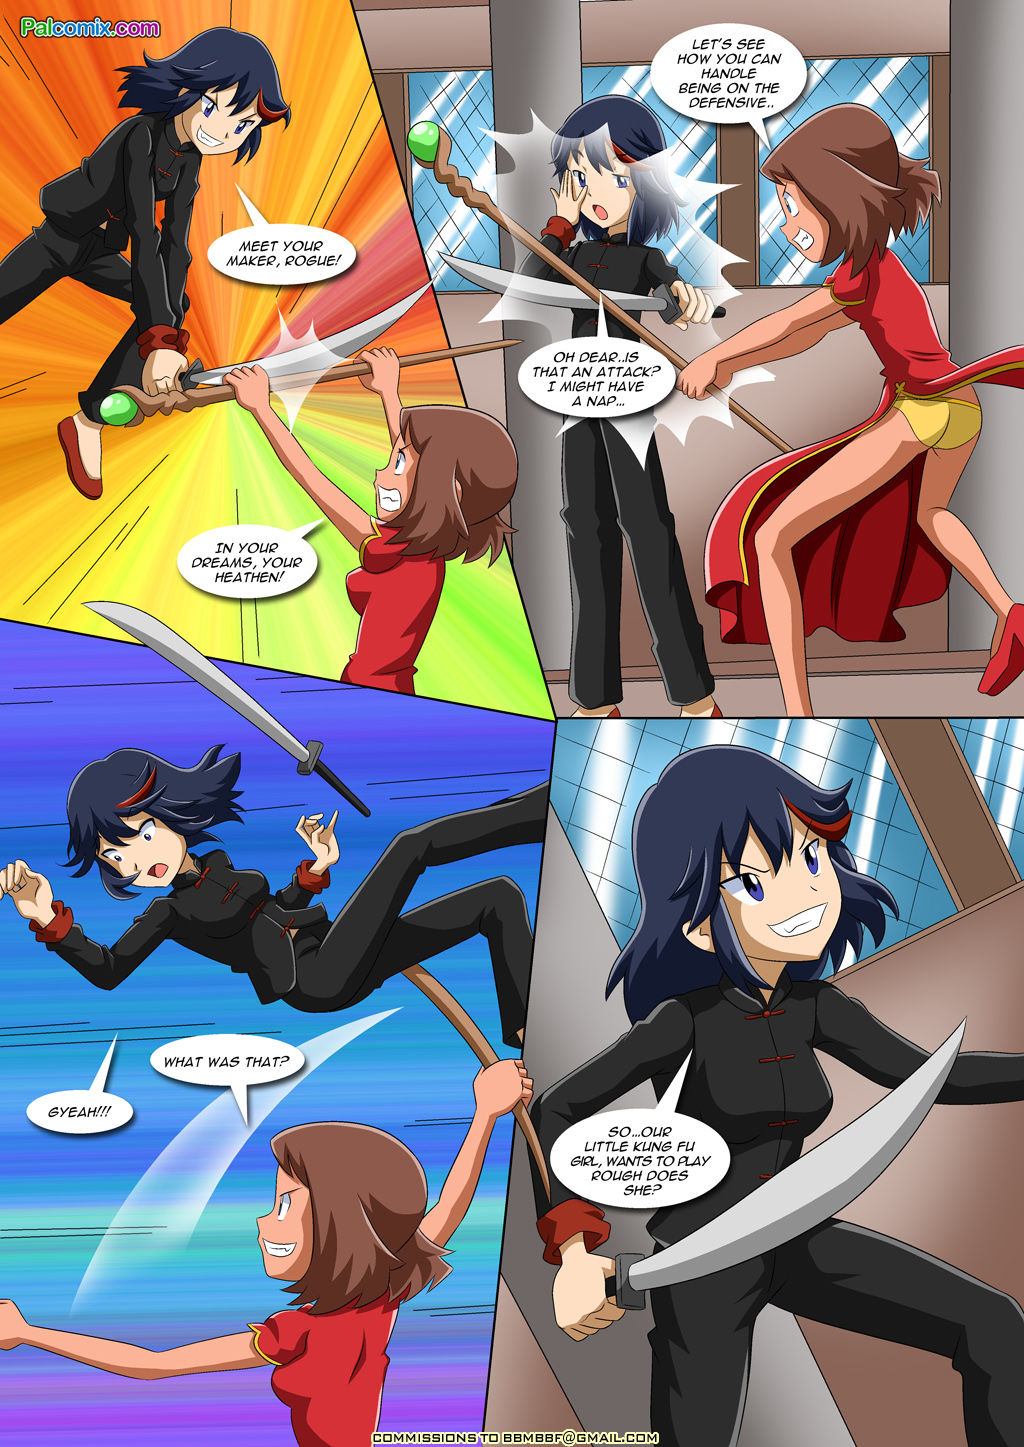 Lesbian Fantasy Island - Part 2 - Page 4 - HentaiEra